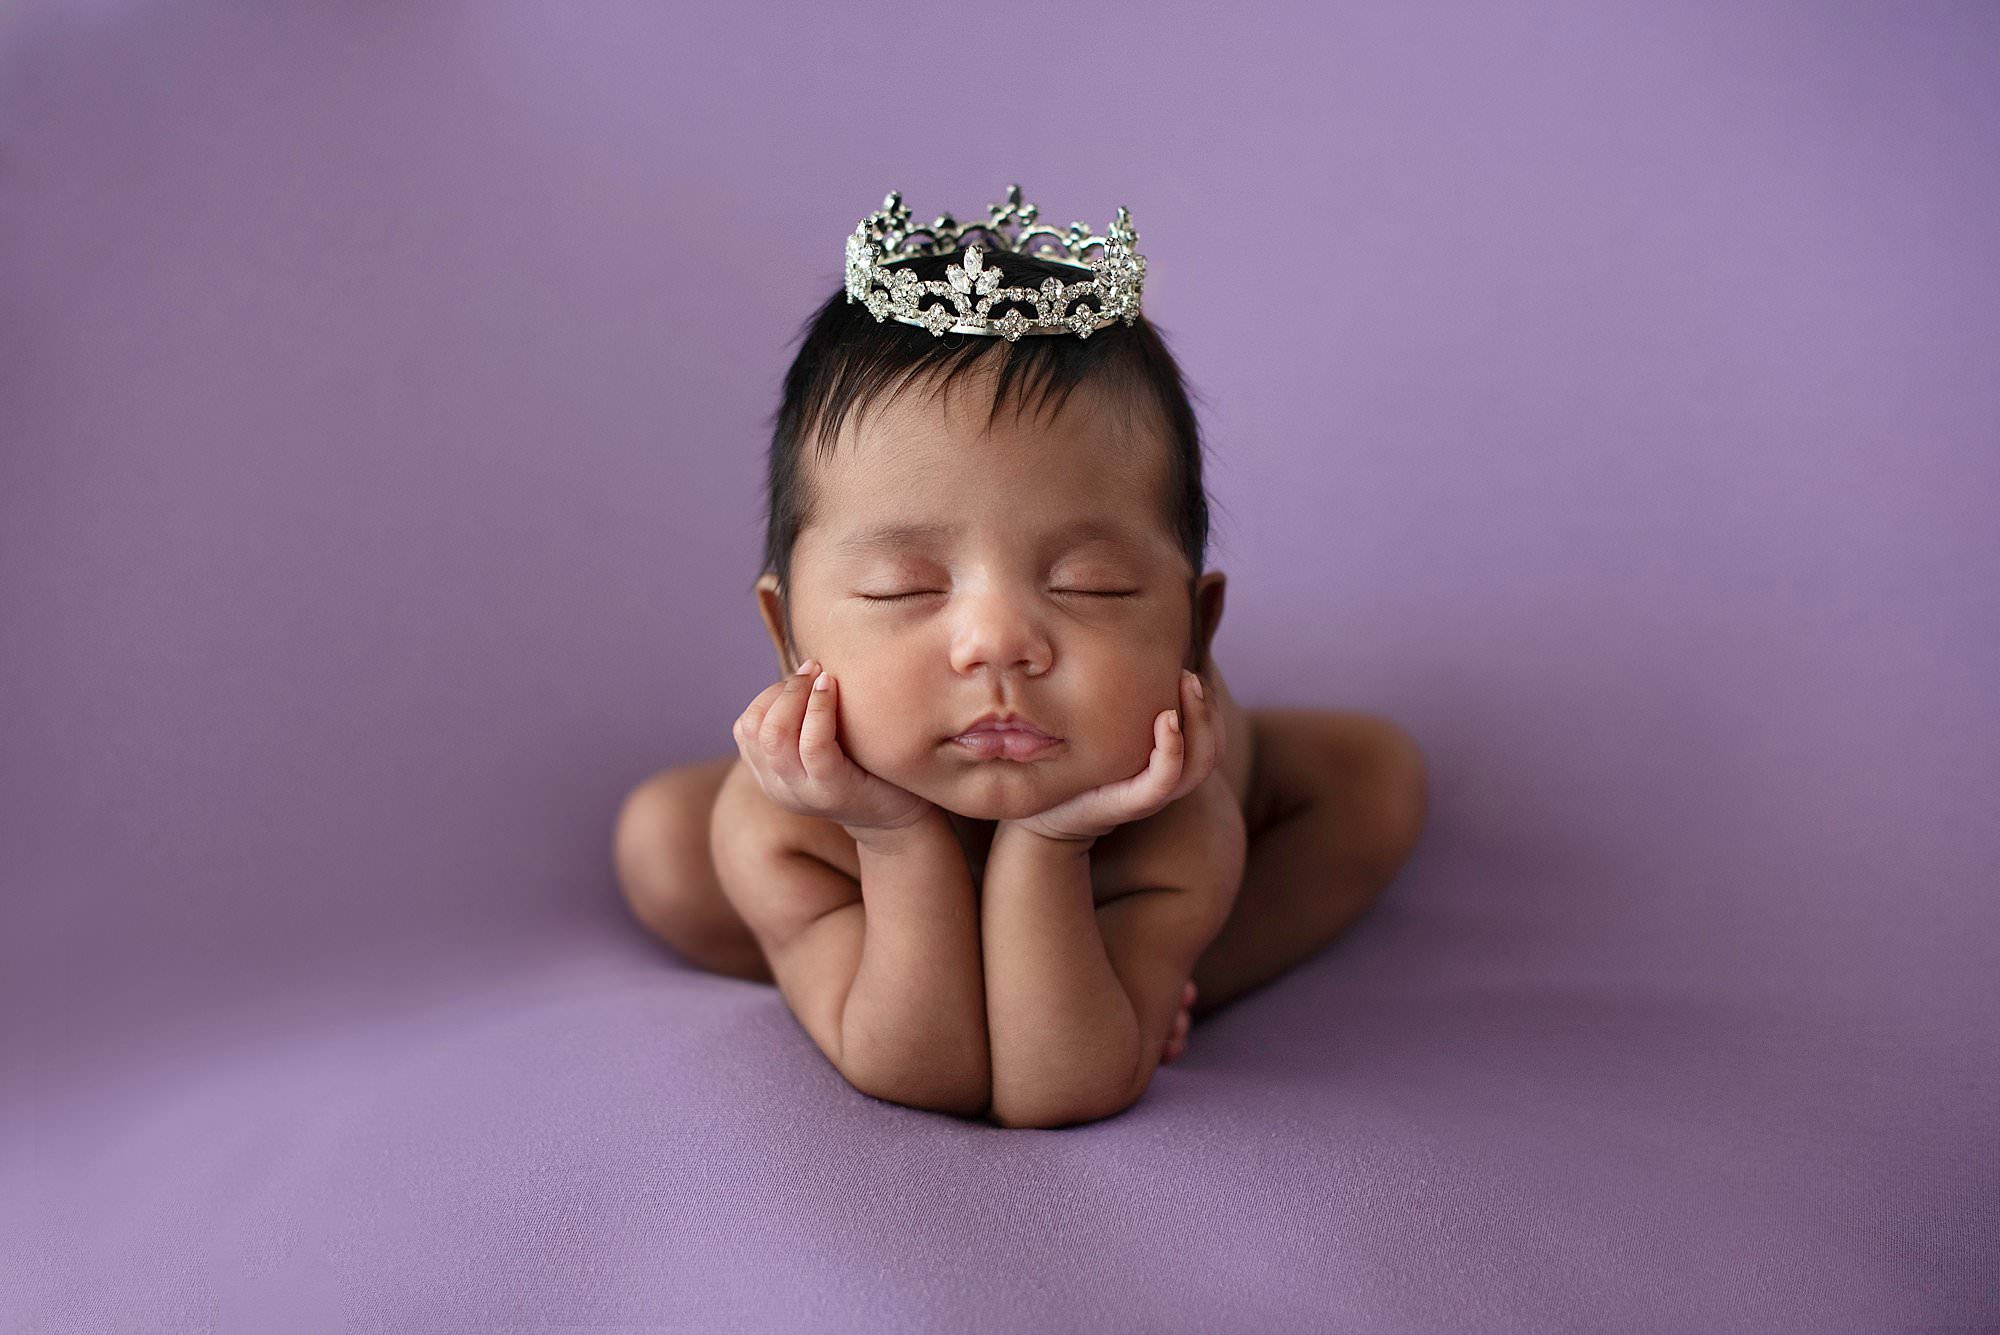 Sleeping baby wearing a crown on purple backdrop by South Florida Newborn Photographer